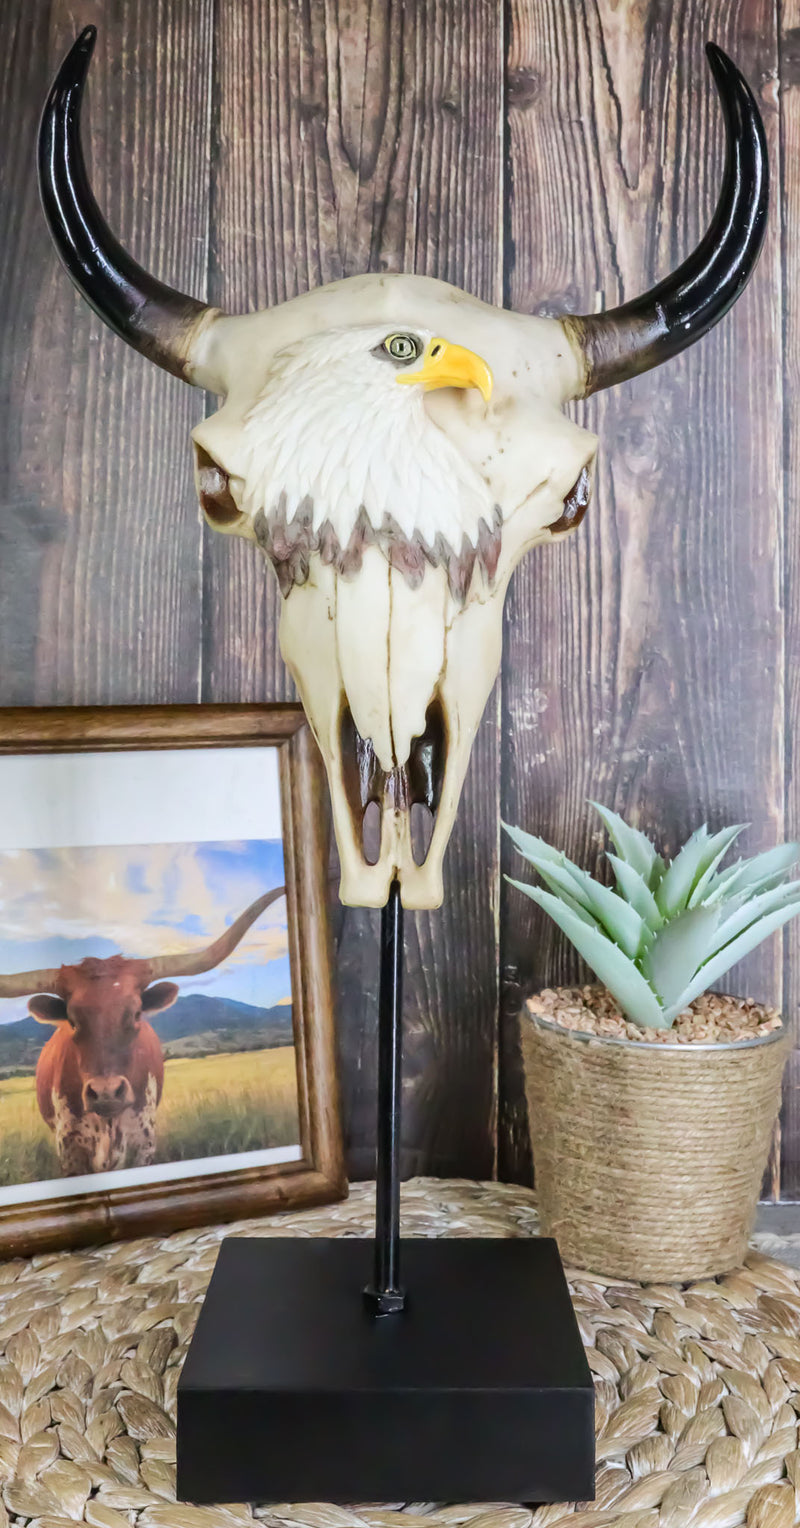 Western Rustic Bull Cow Steer Skull With Bald Eagle Sculpture On Pole Display